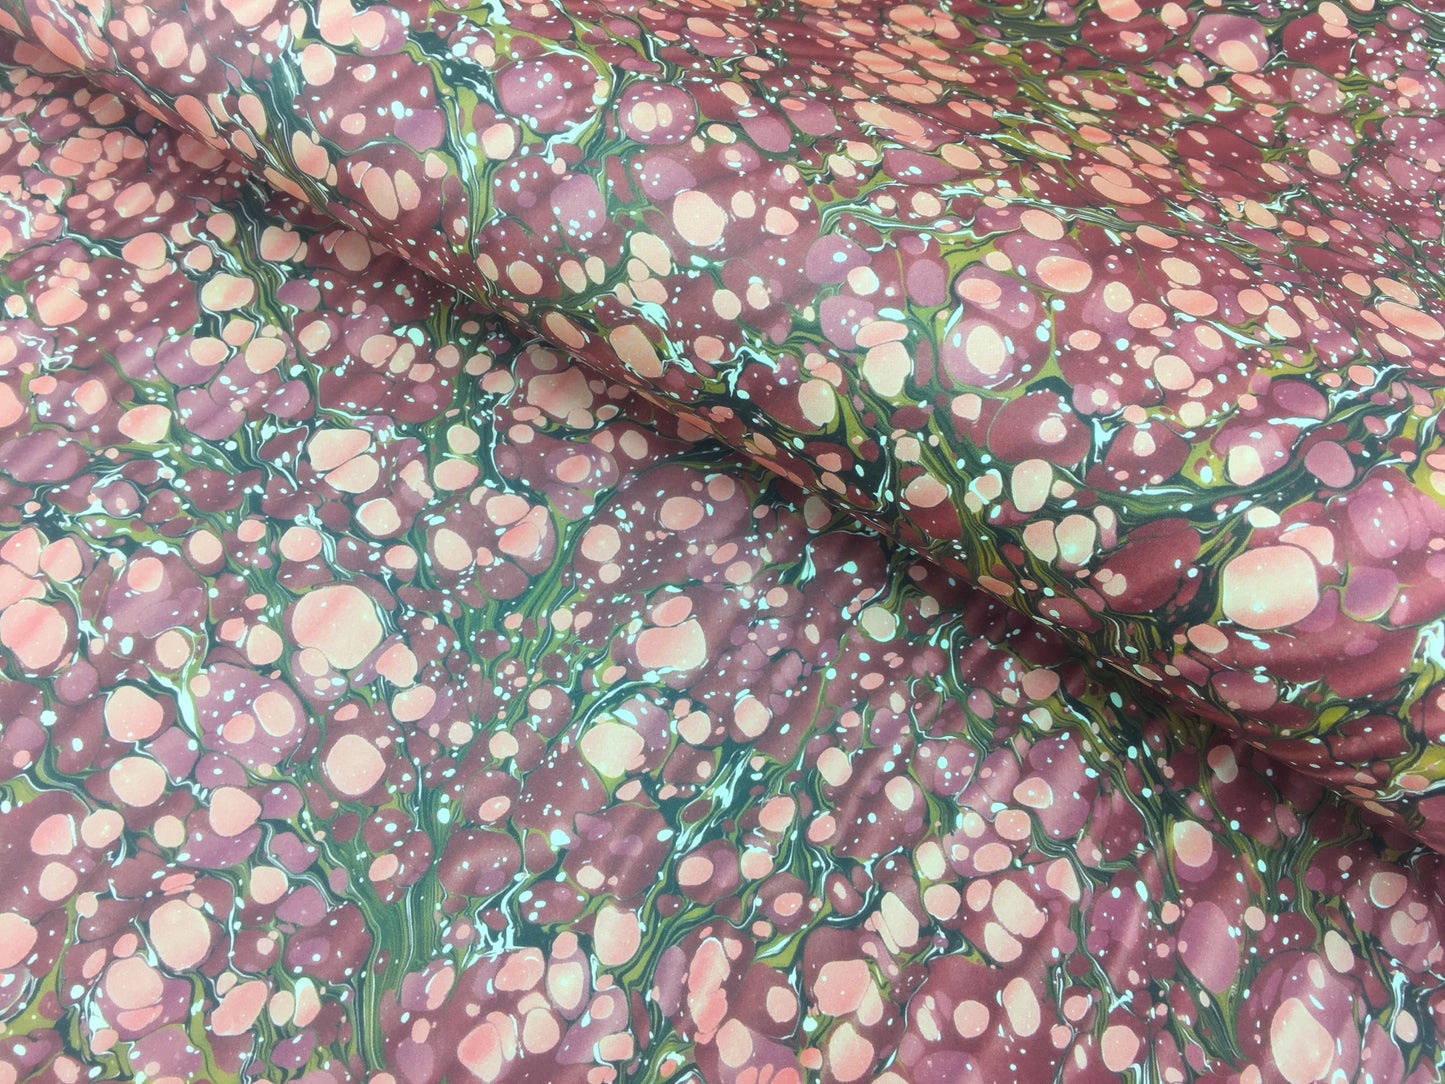 Printed marbled paper- HIGH DEFINITION-  THICK 100GSM ACID FREE PAPER- Suitable for book covers and end sheets- TBBPM20